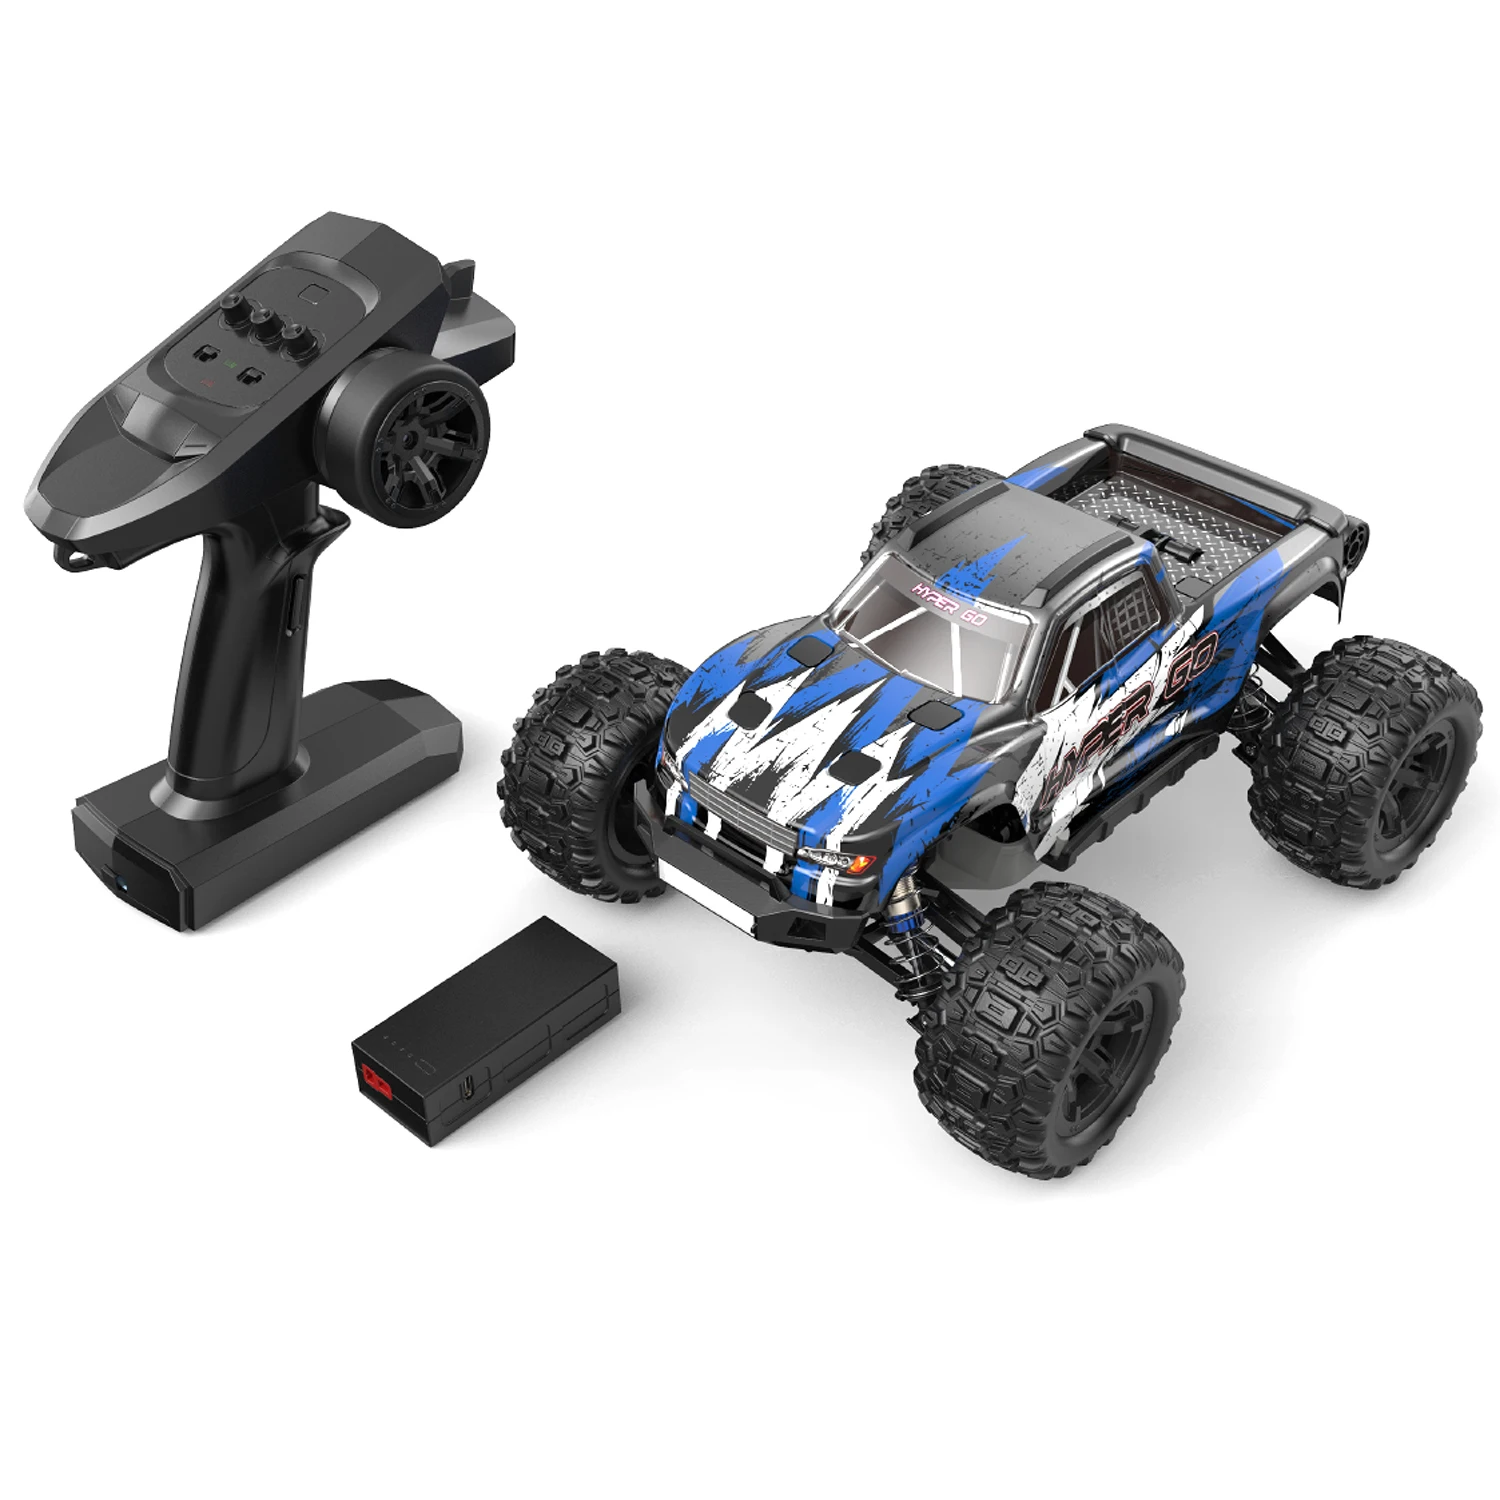 HYPER GO H16BM 1:16 4X4 RTR Brushless Fast RC Cars for Adults, Max 42mph  Hobby Electric Off-Road Jumping RC Trucks, RC Monster Trucks Oil Filled  Shock 自動車